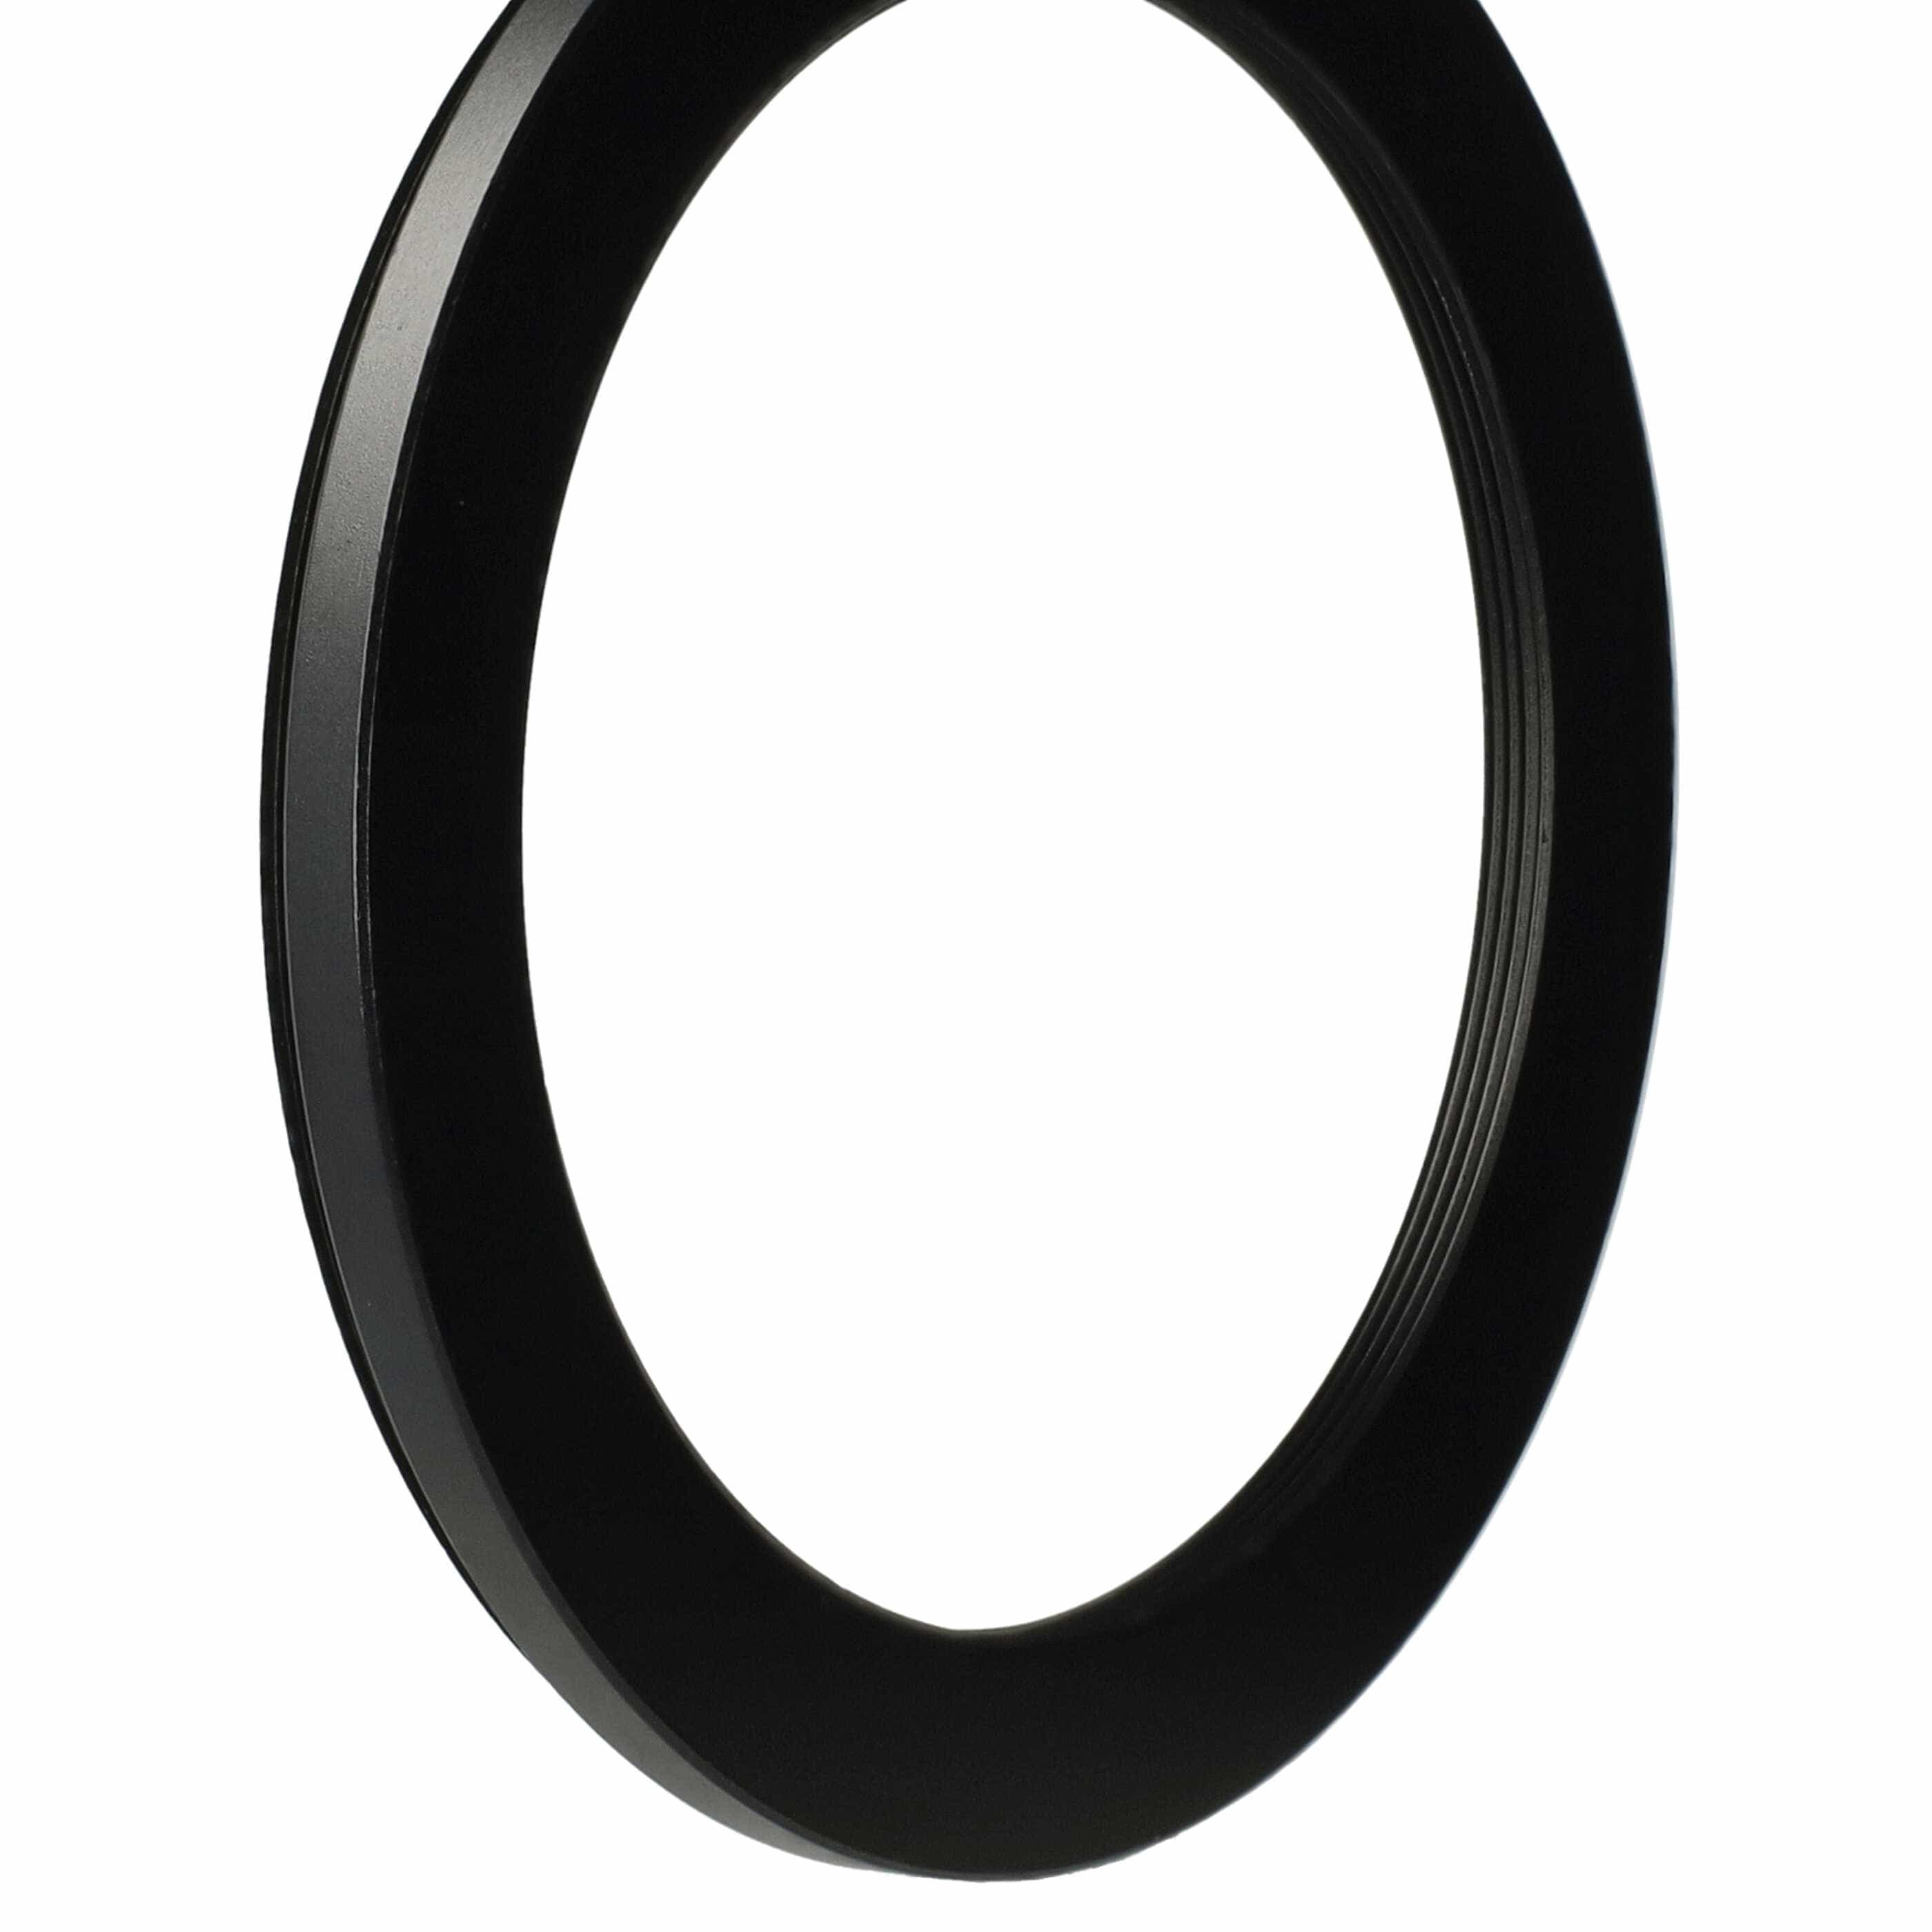 Step-Down Ring Adapter from 77 mm to 62 mm suitable for Camera Lens - Filter Adapter, metal